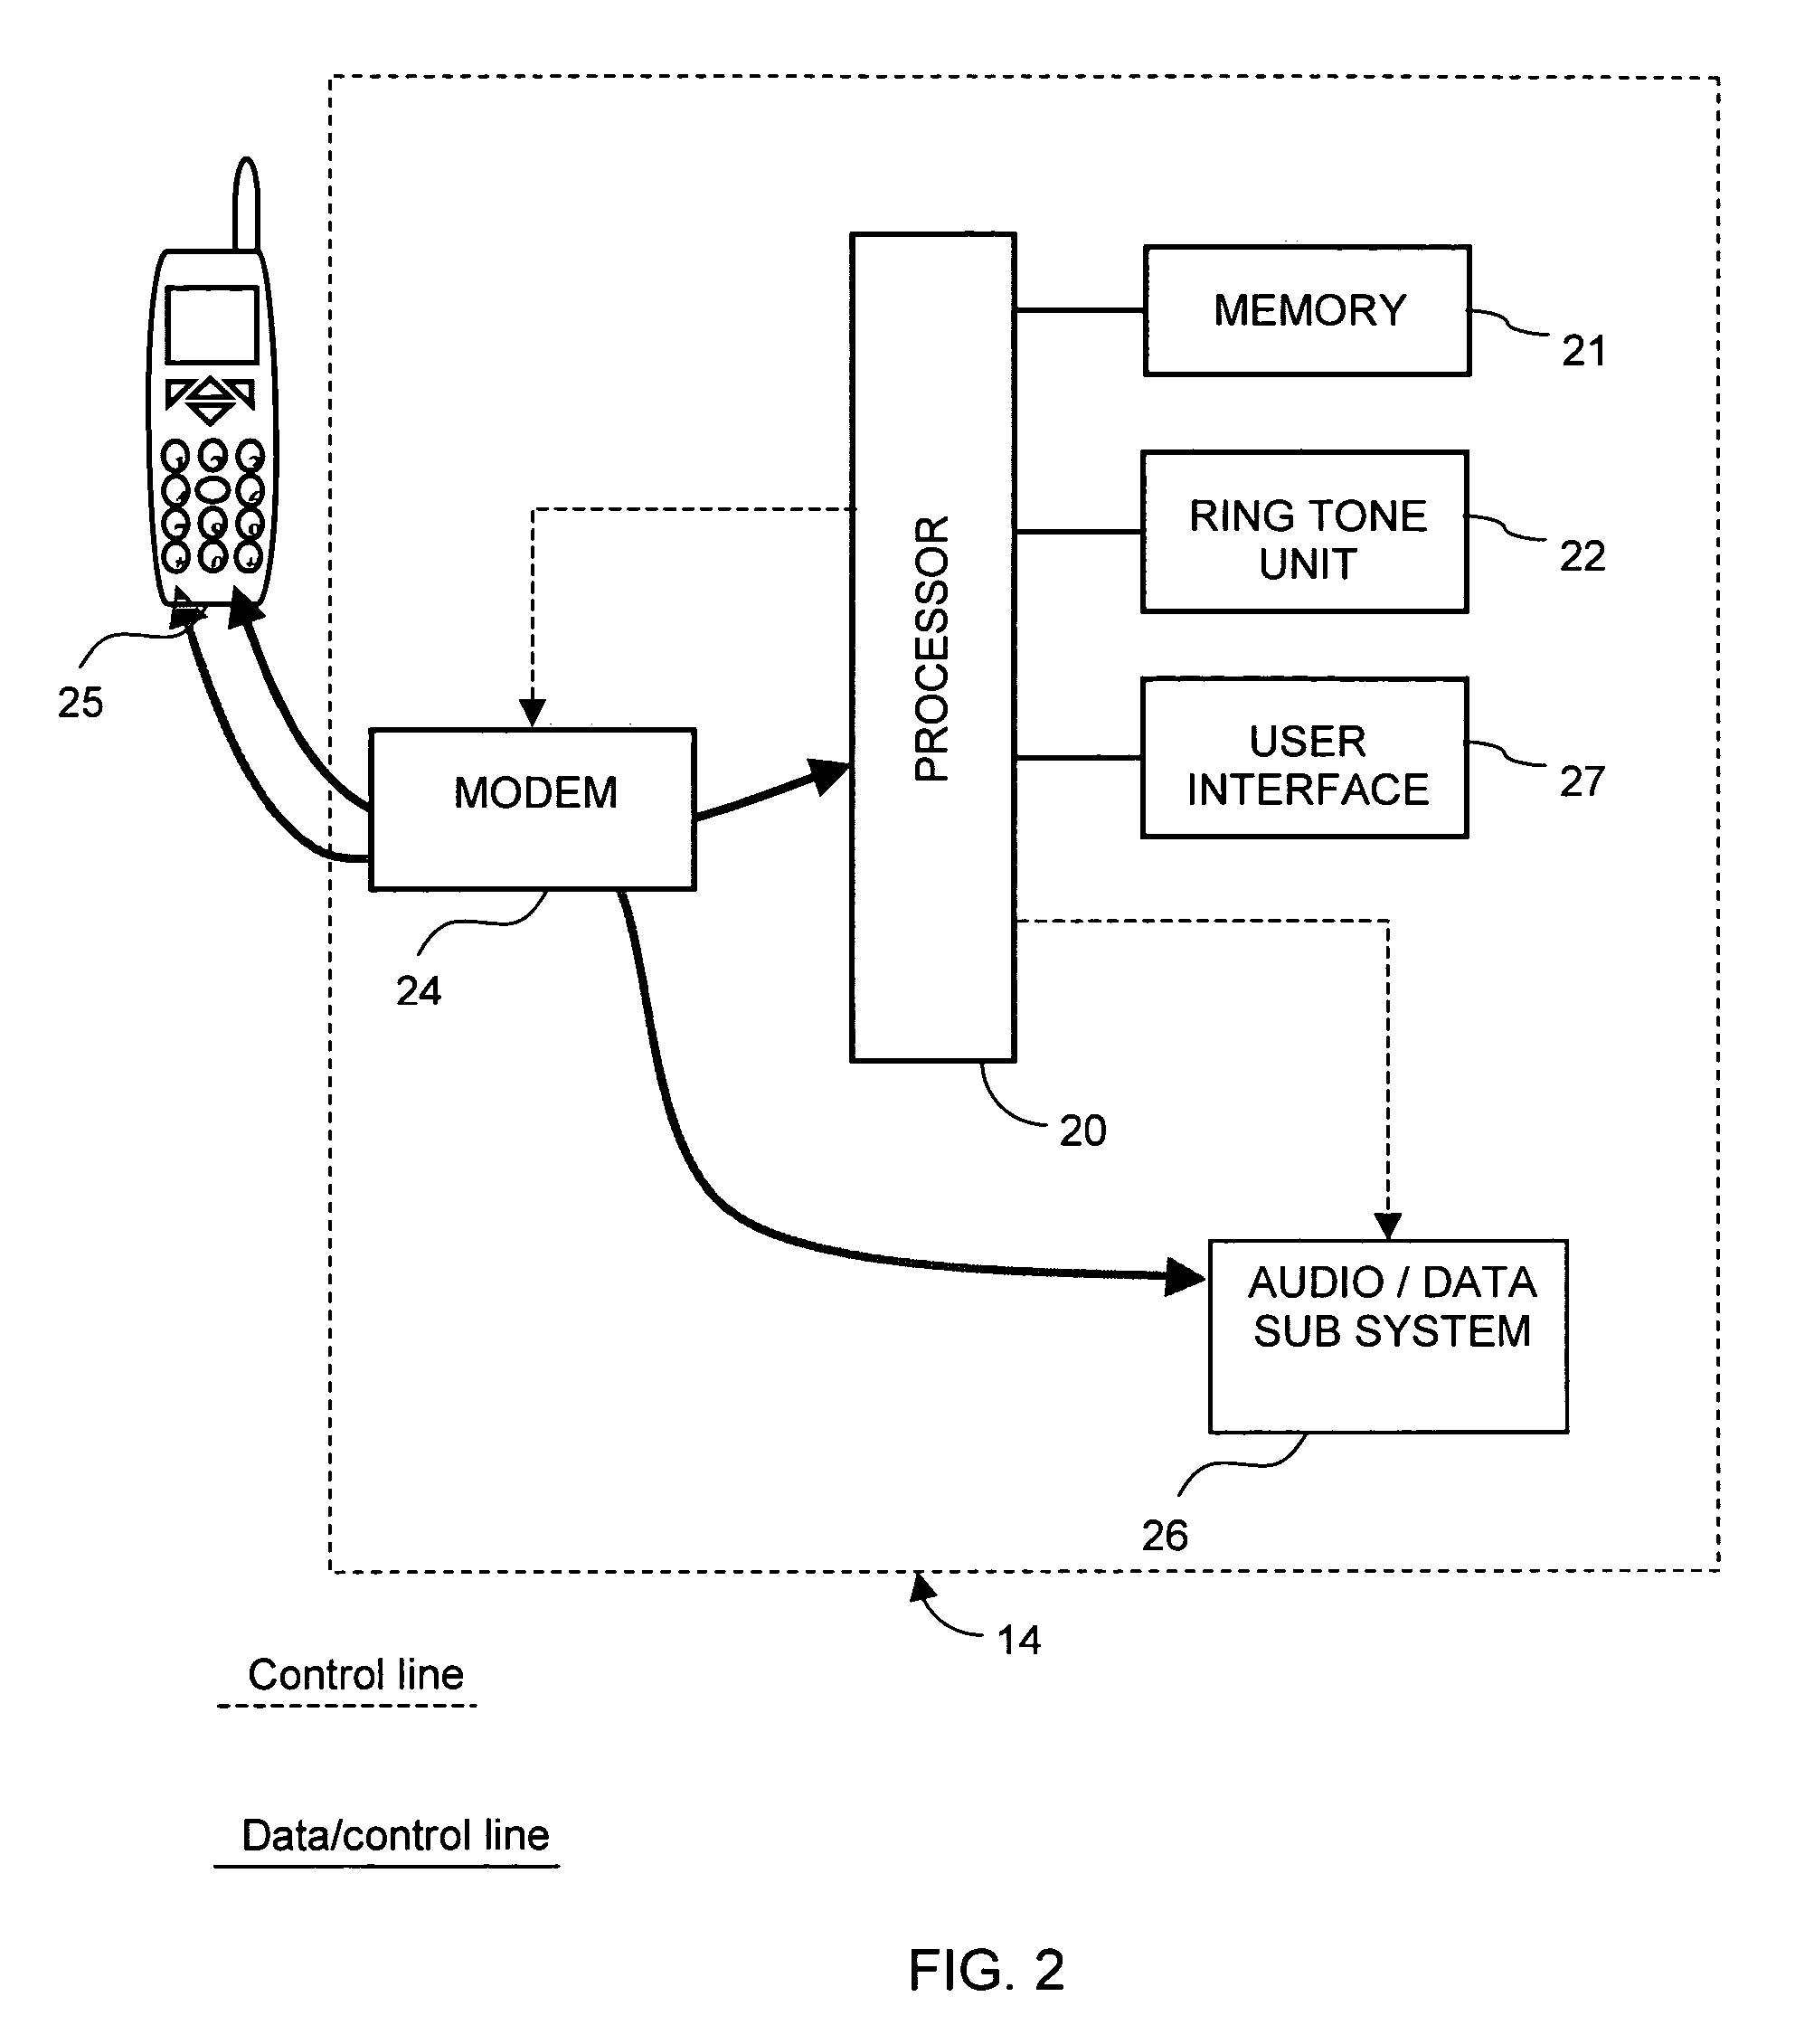 Method and apparatus for vocalizing characteristic ring signal of called party in a telephone system